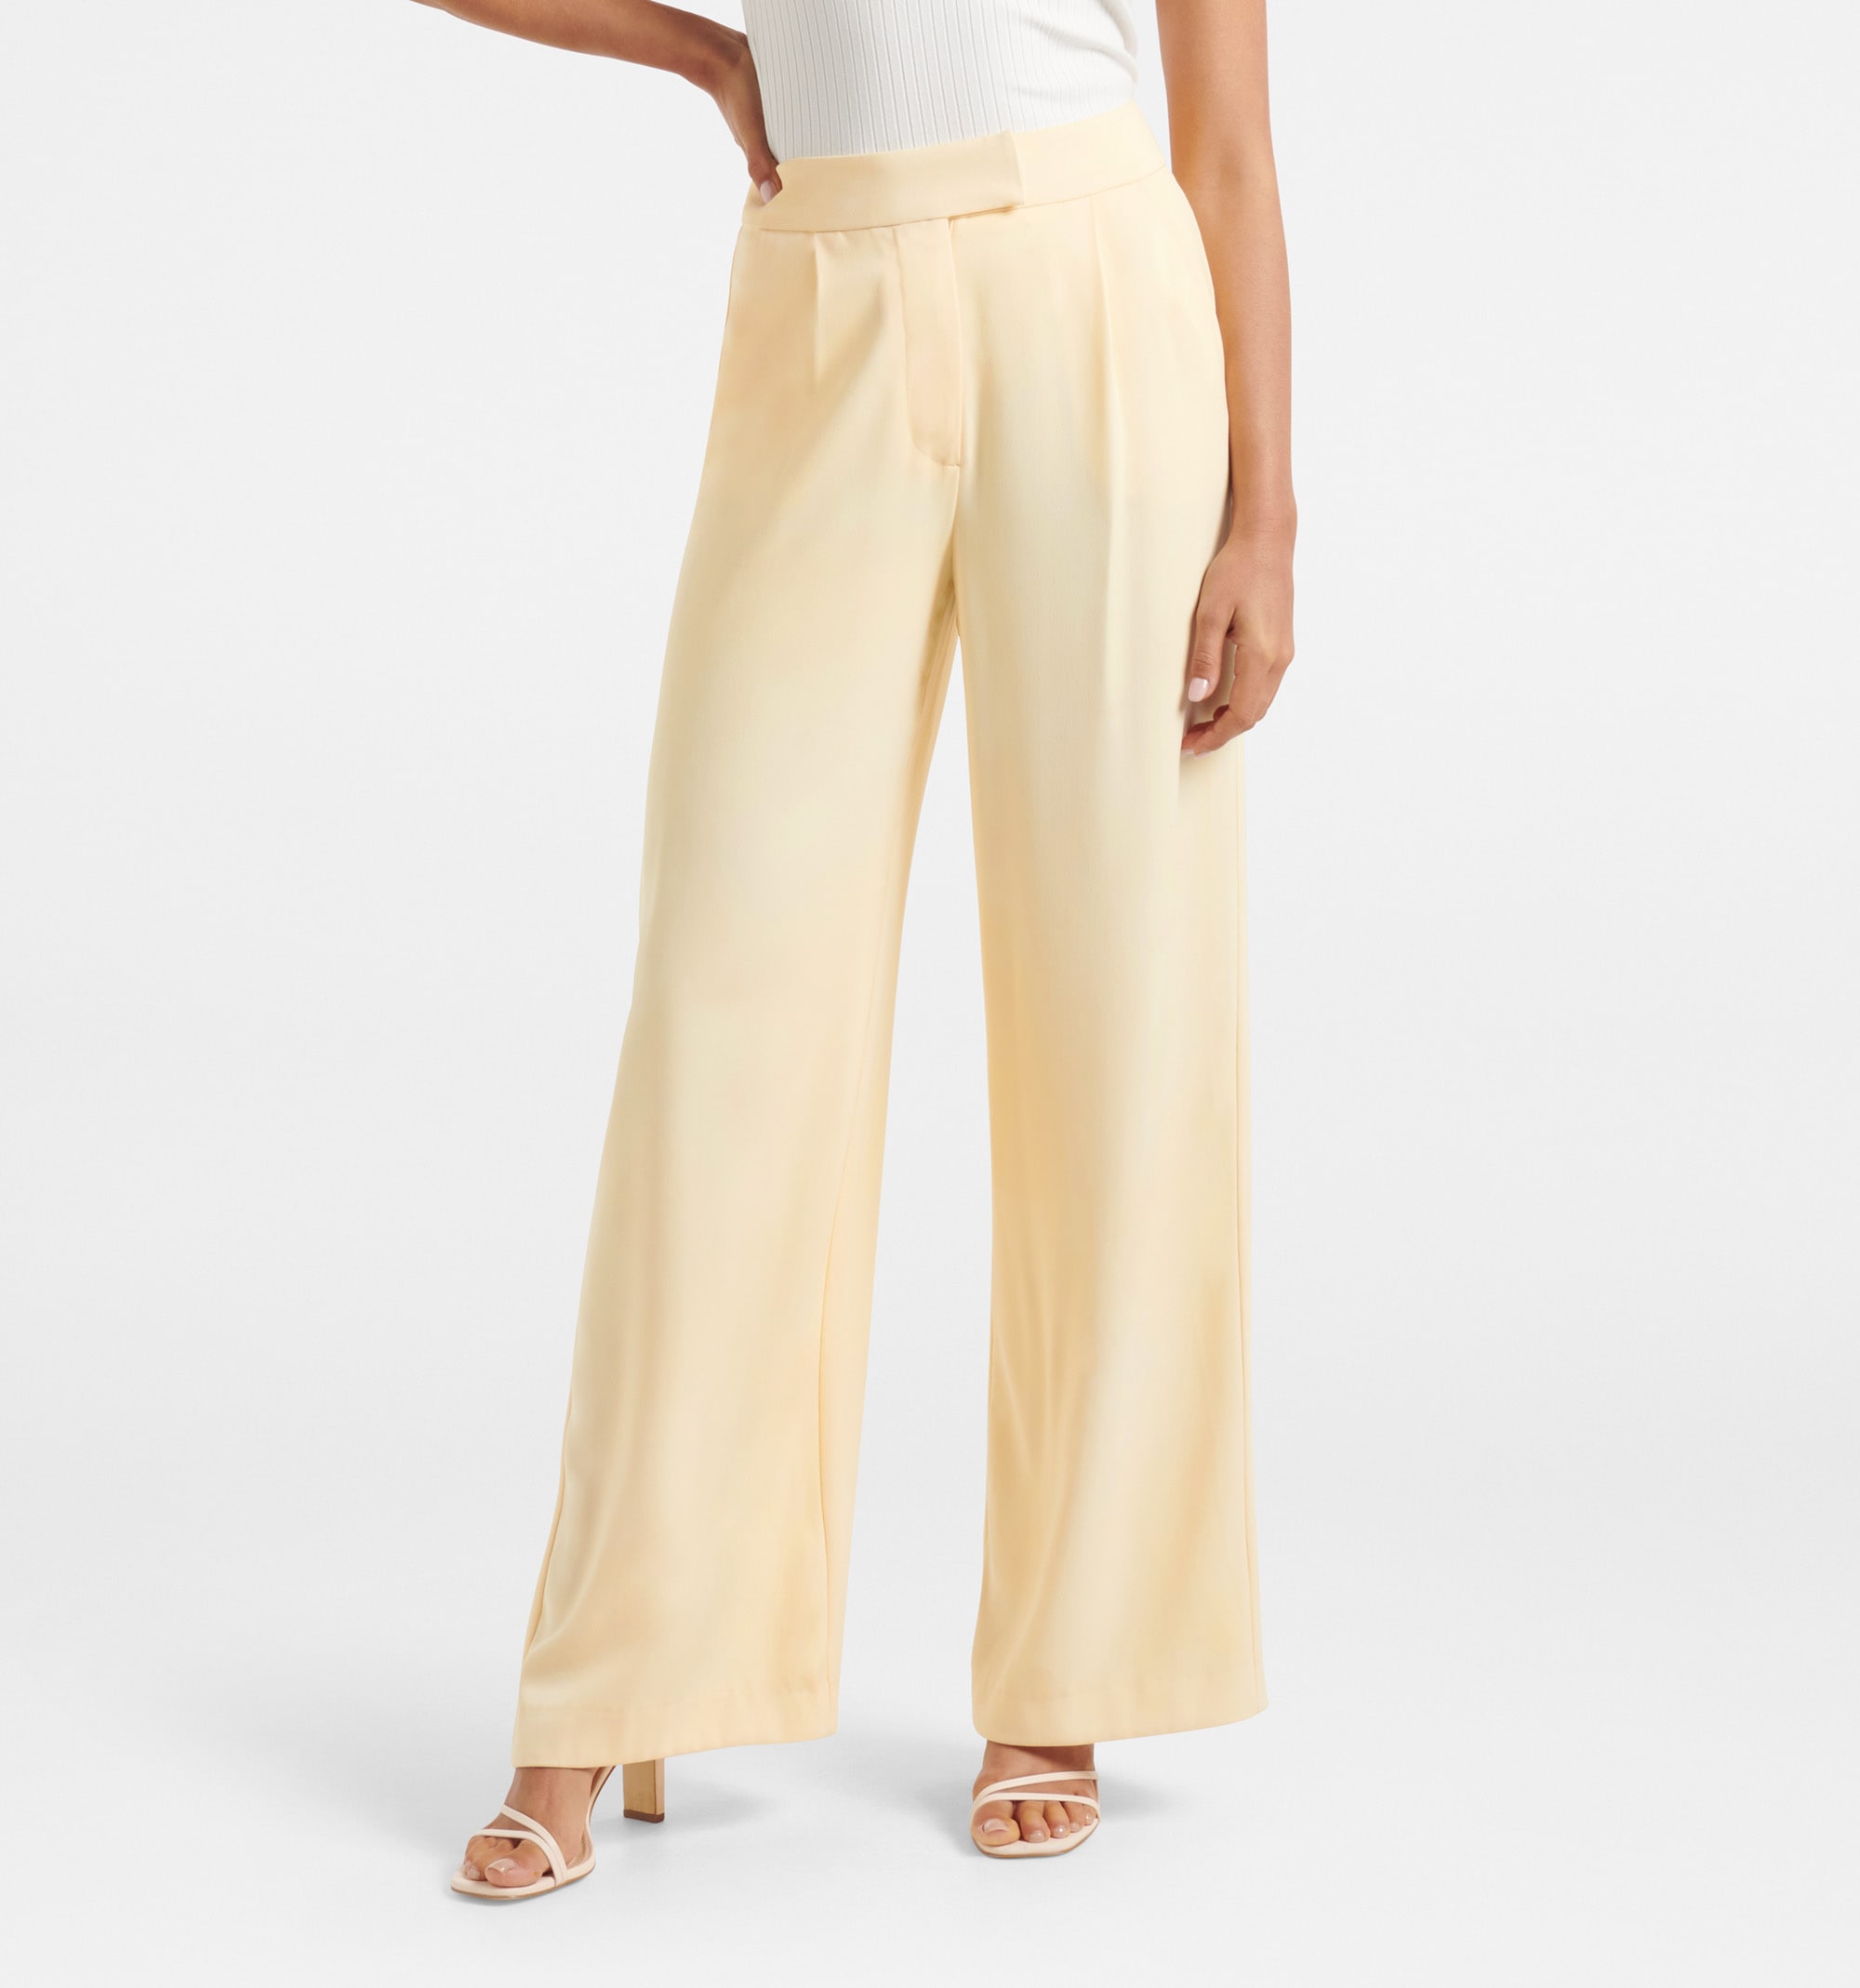 Buy Marley Petite Flare Pants - Forever New